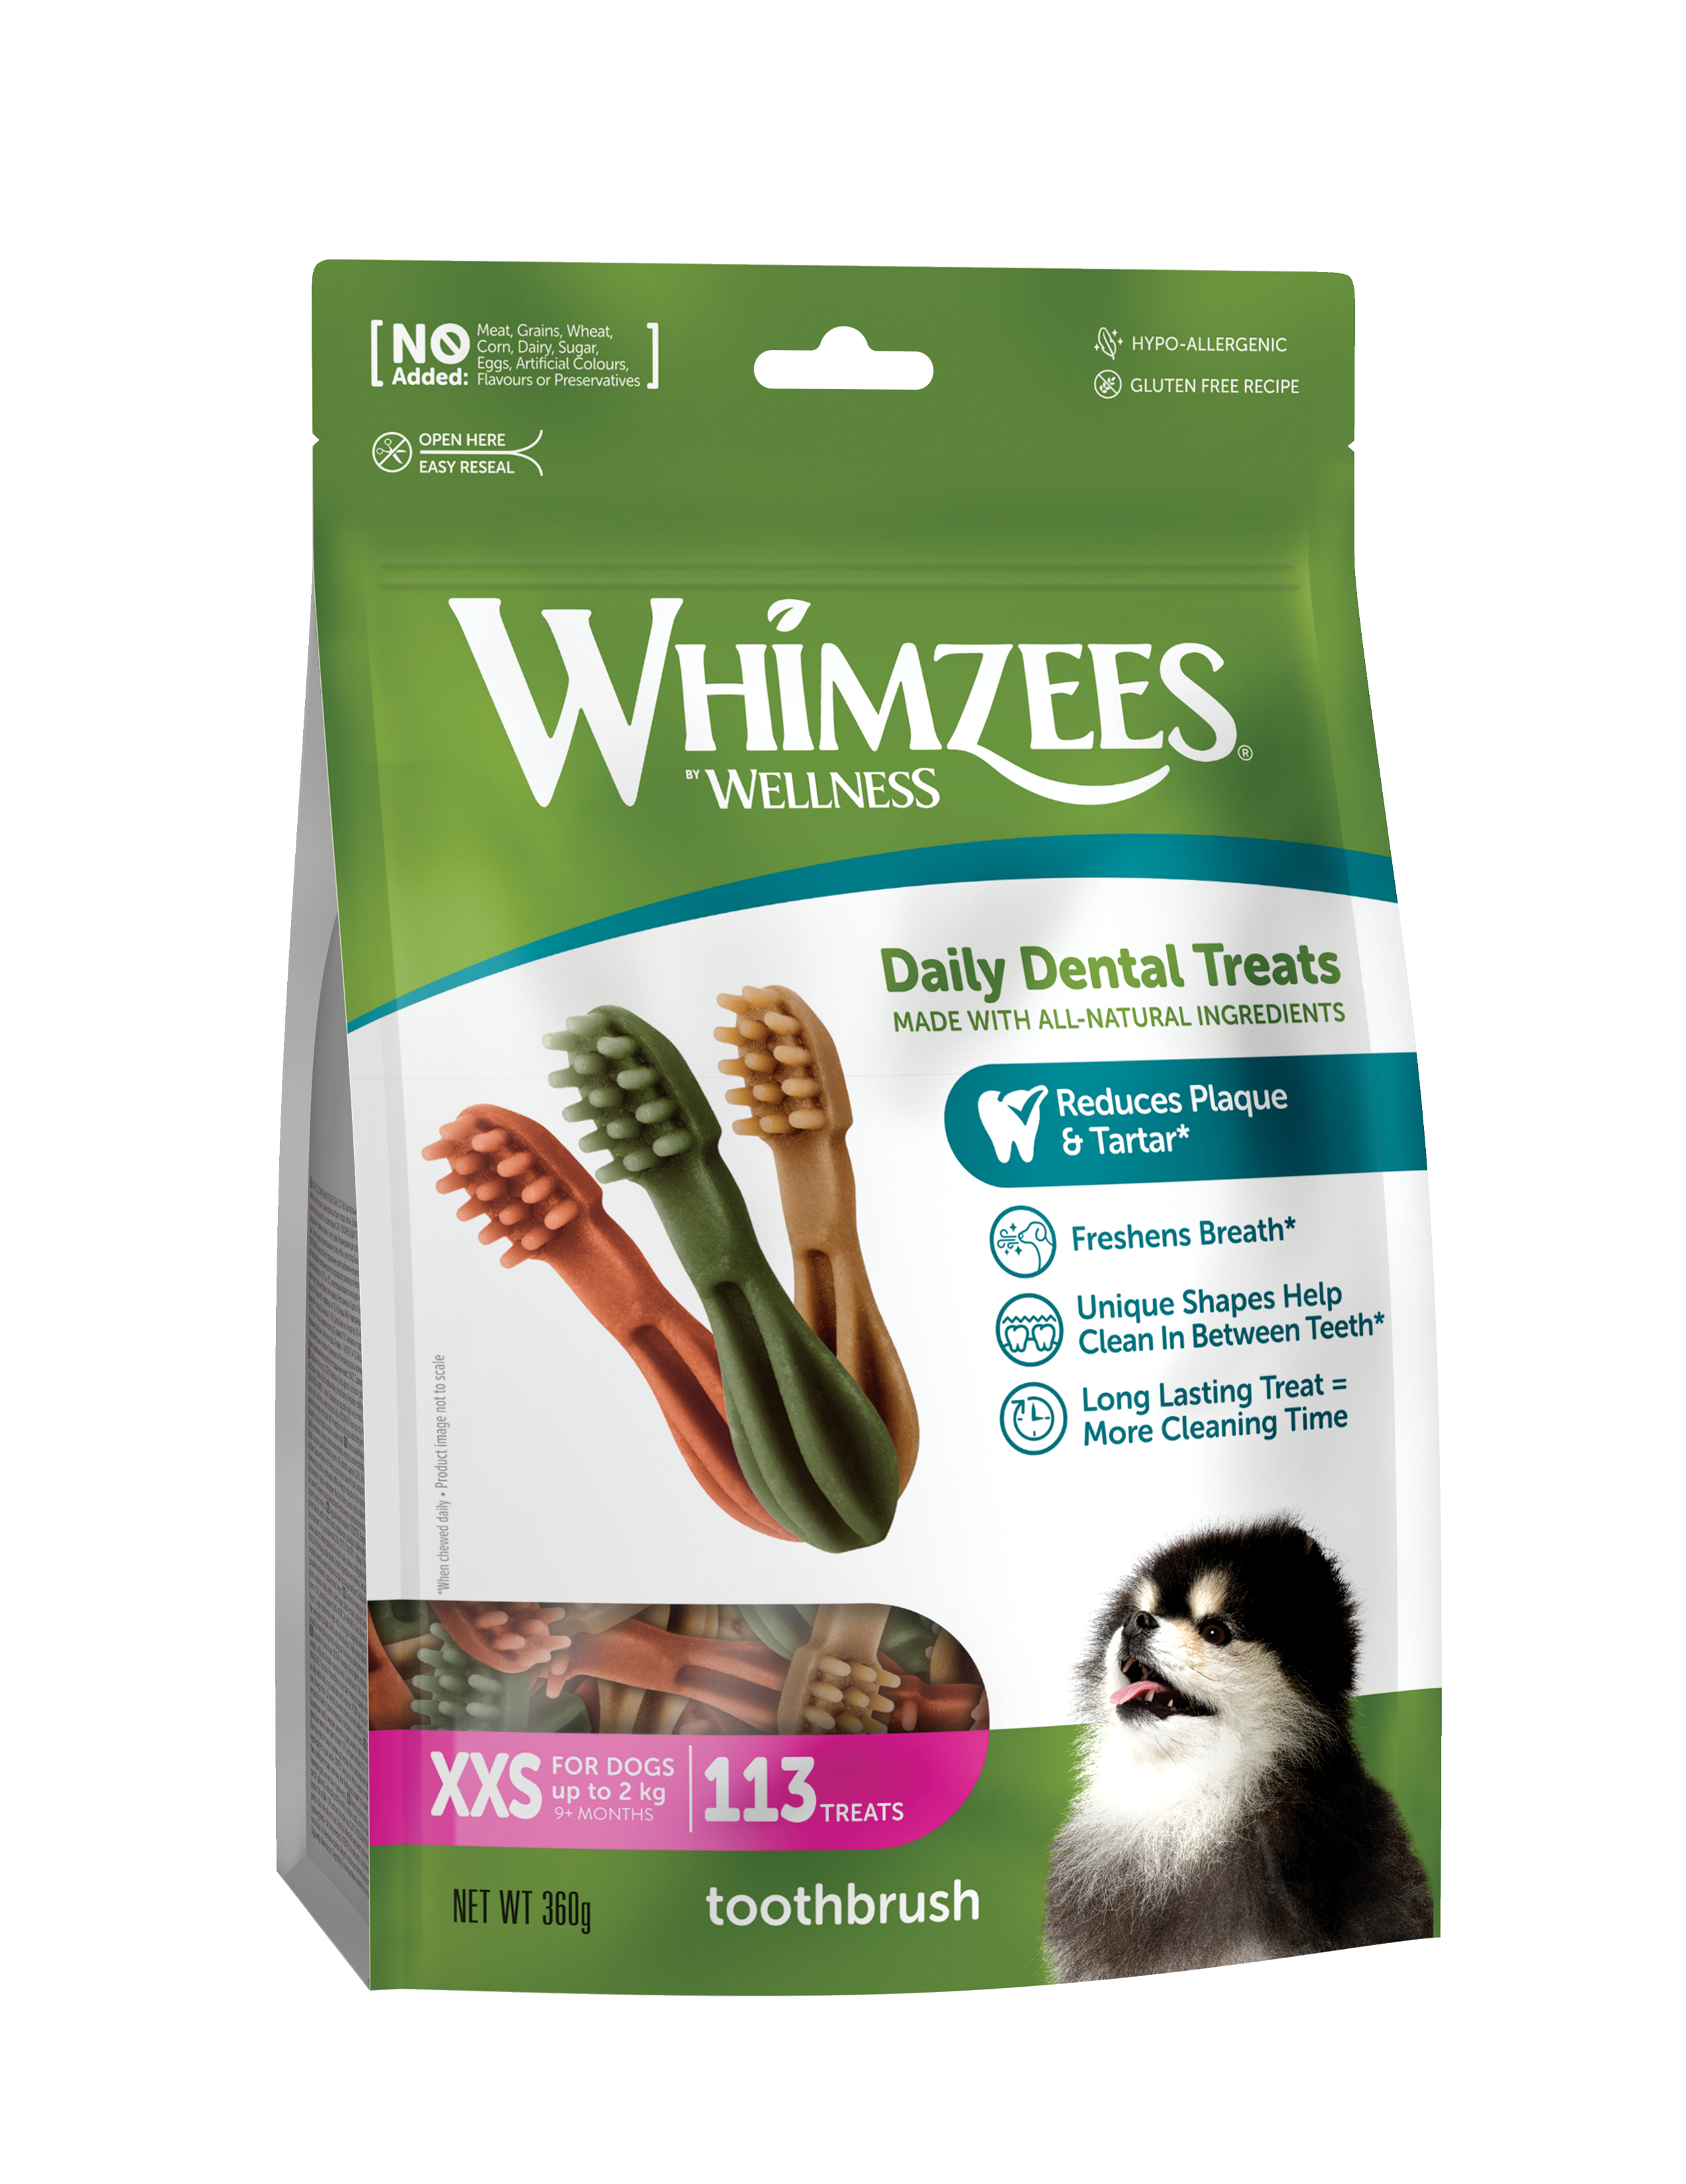 Whimzees Dental Treats Value Bags - Toothbrush